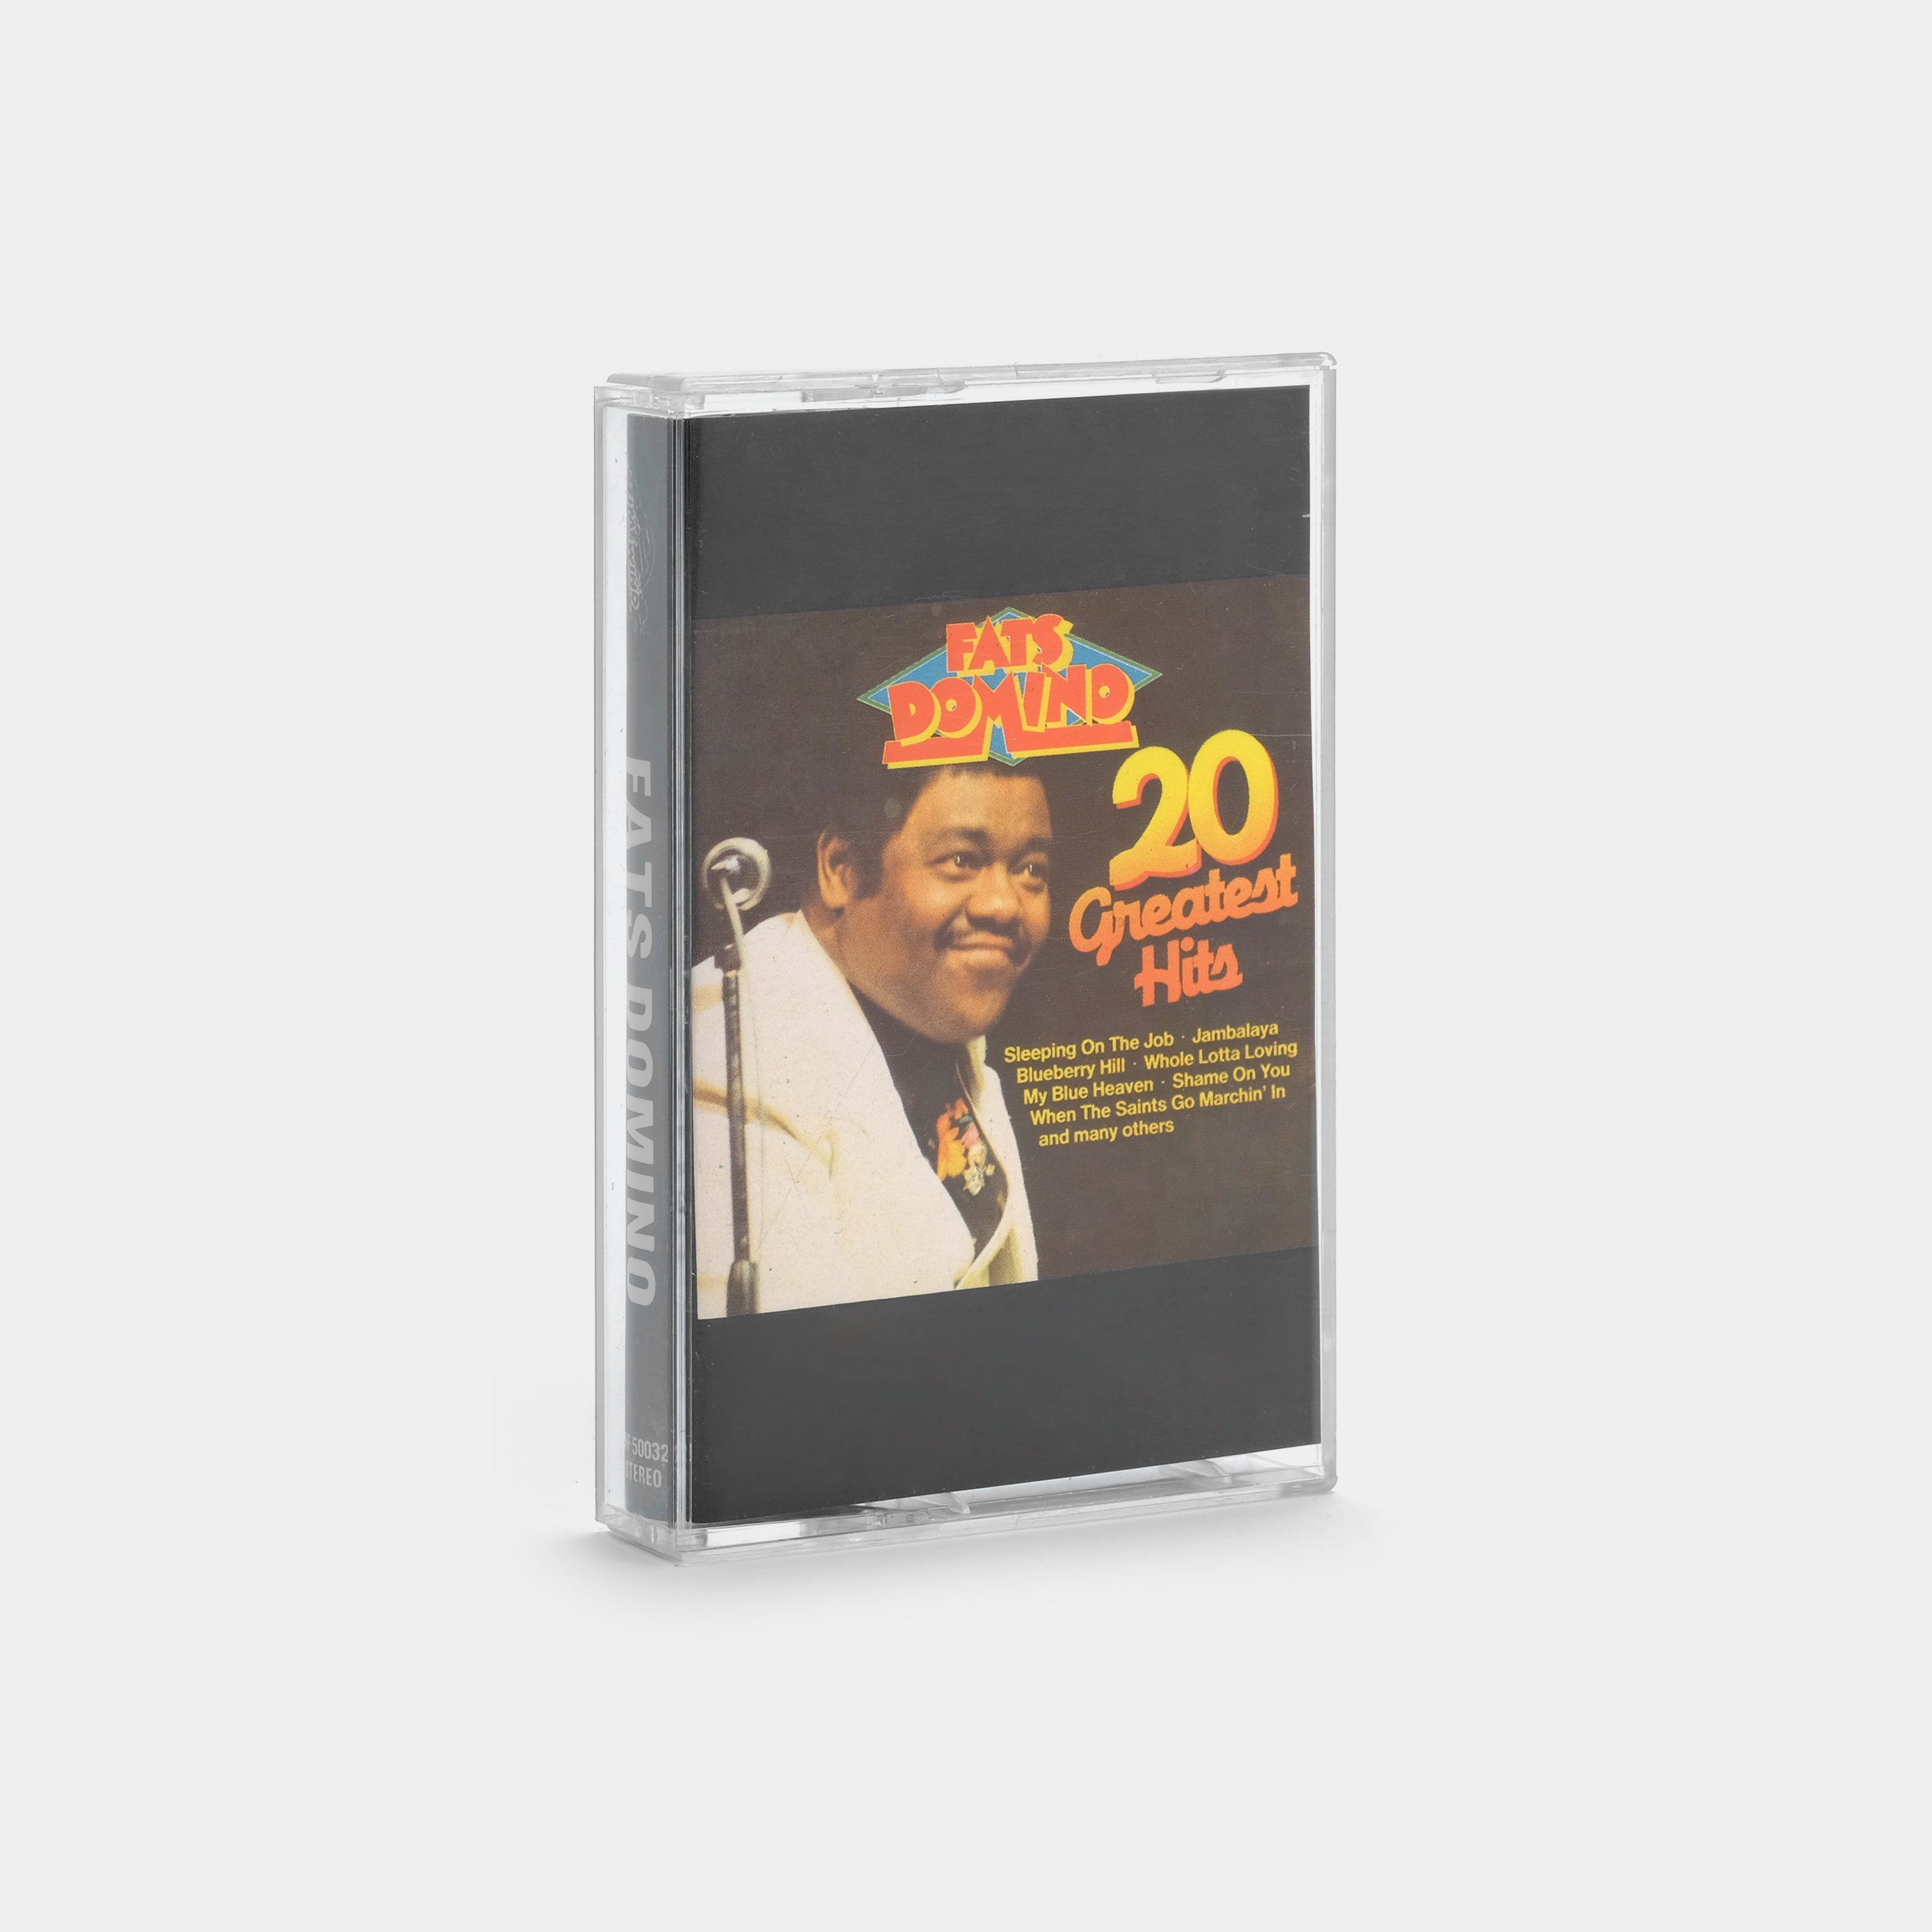 Fats Domino - 20 Greatest Hits Cassette Tape